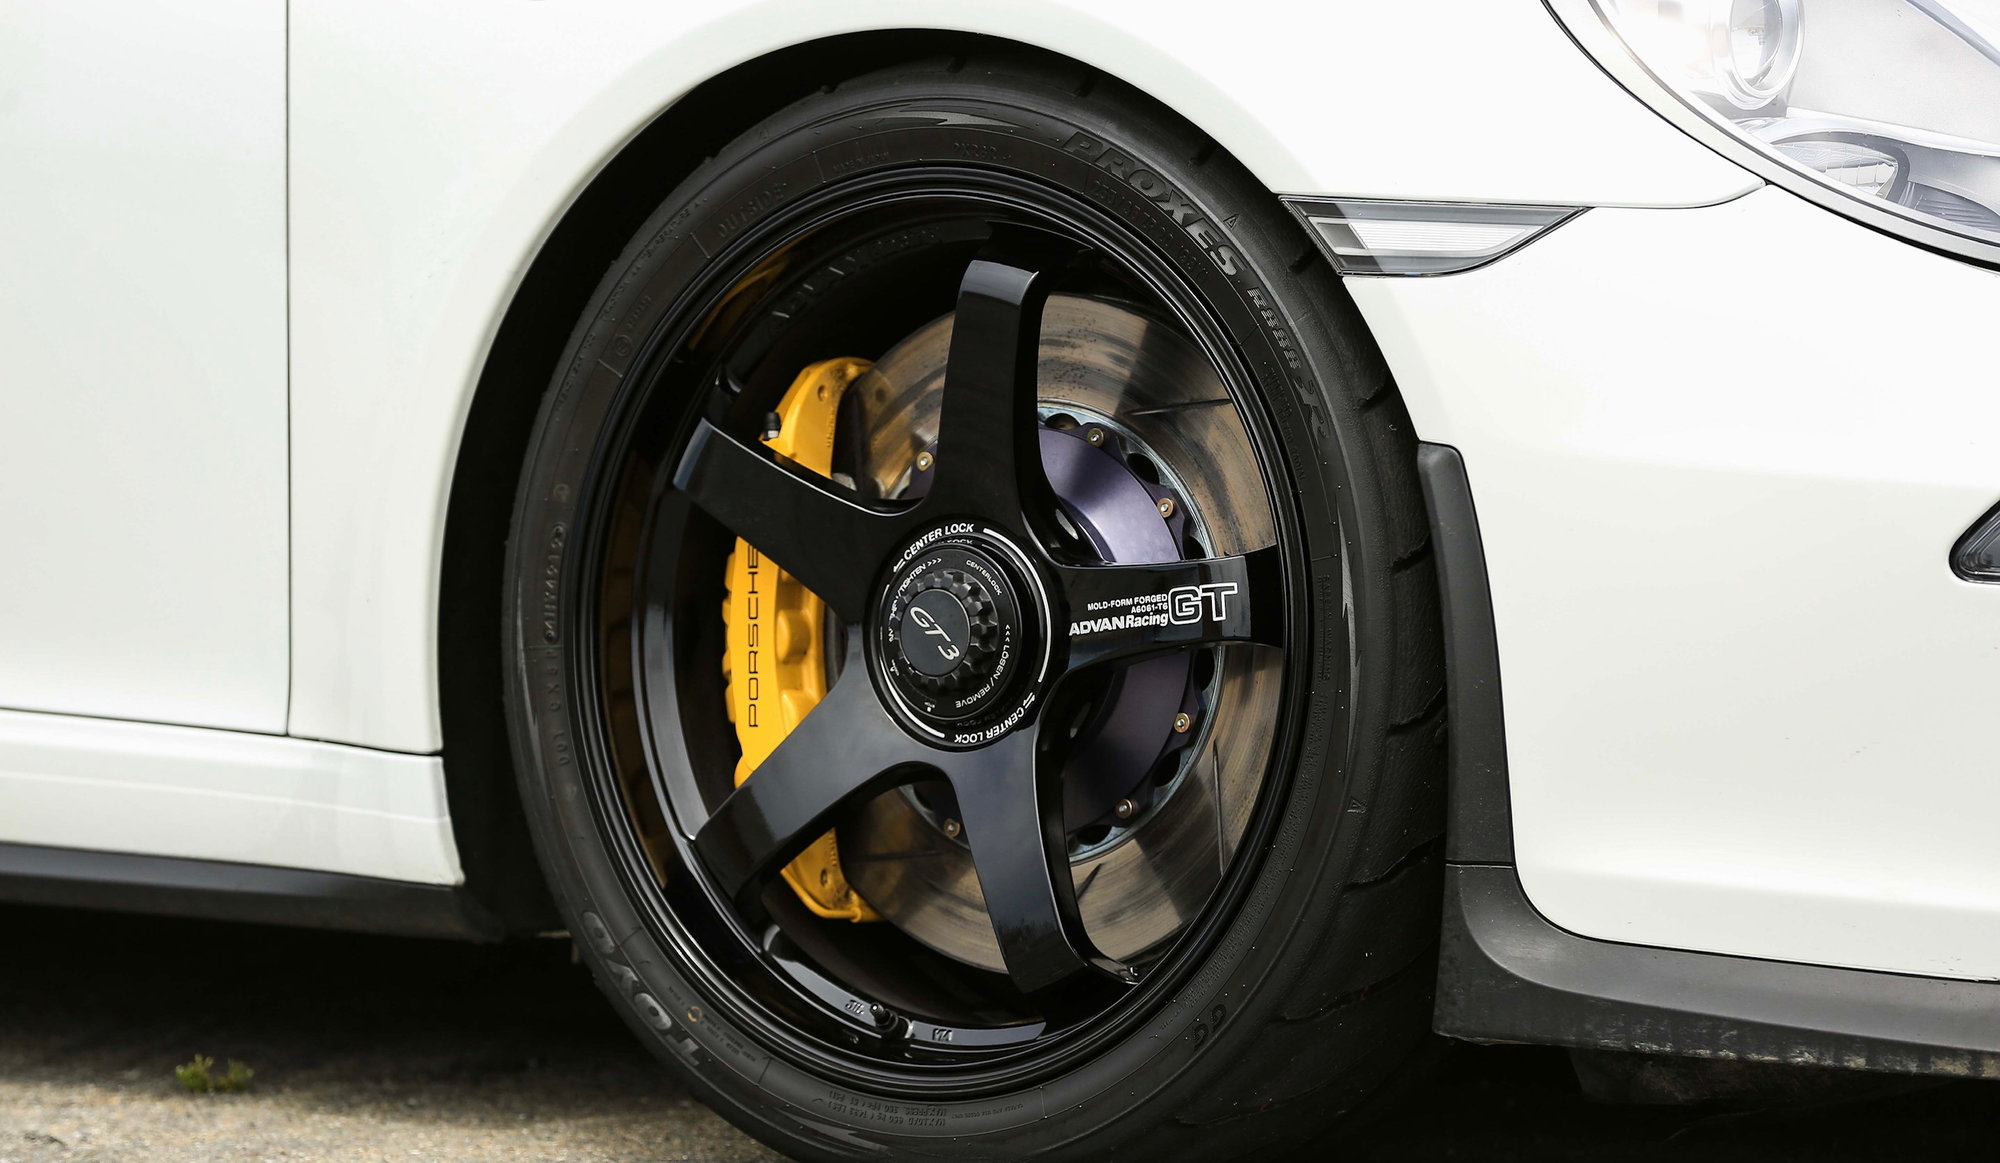 Wheels and Tires/Axles - Advan Racing GT Premium one-piece forged center lock wheels in high gloss black - Used - 0  All Models - Fremont, CA 94538, United States